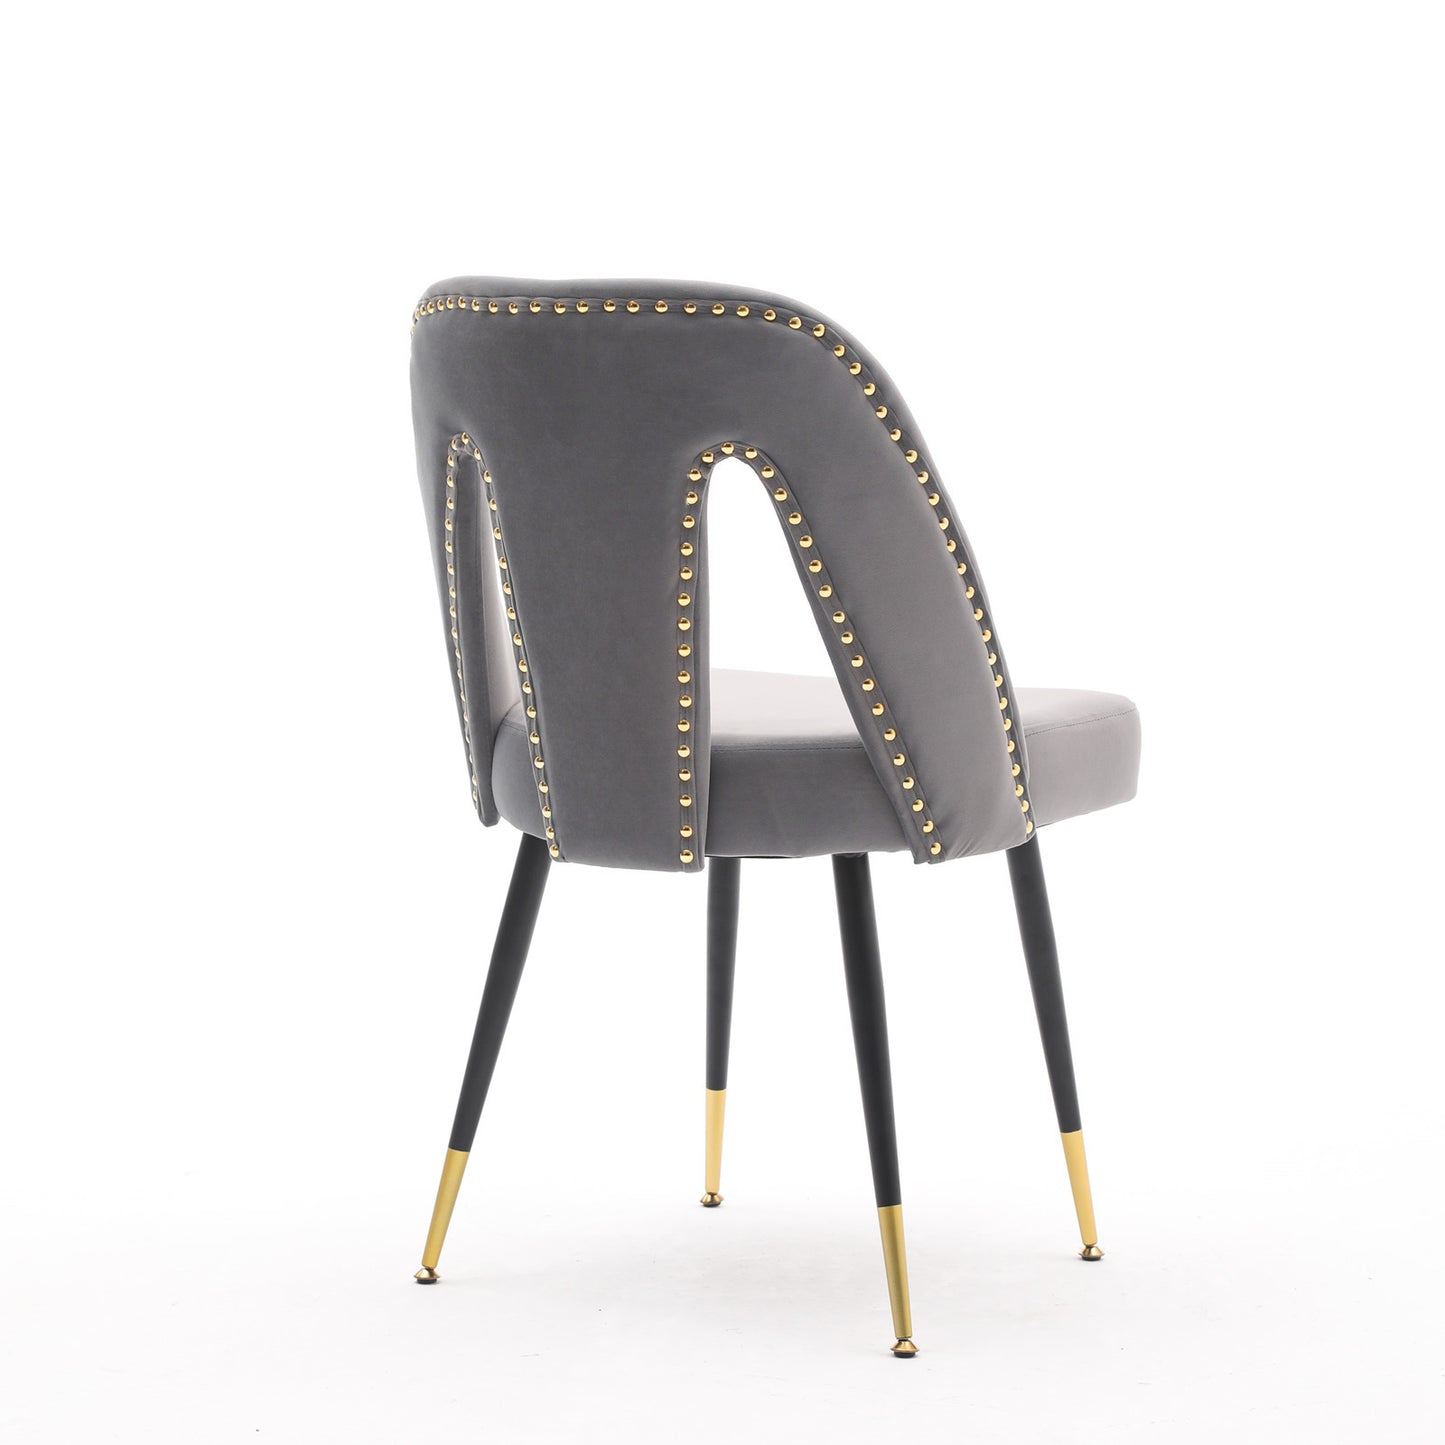 Akoya Collection Modern Contemporary Velvet Upholstered Dining Chair with Nailheads and Gold Tipped Black Metal Legs, Gray, Set of 2